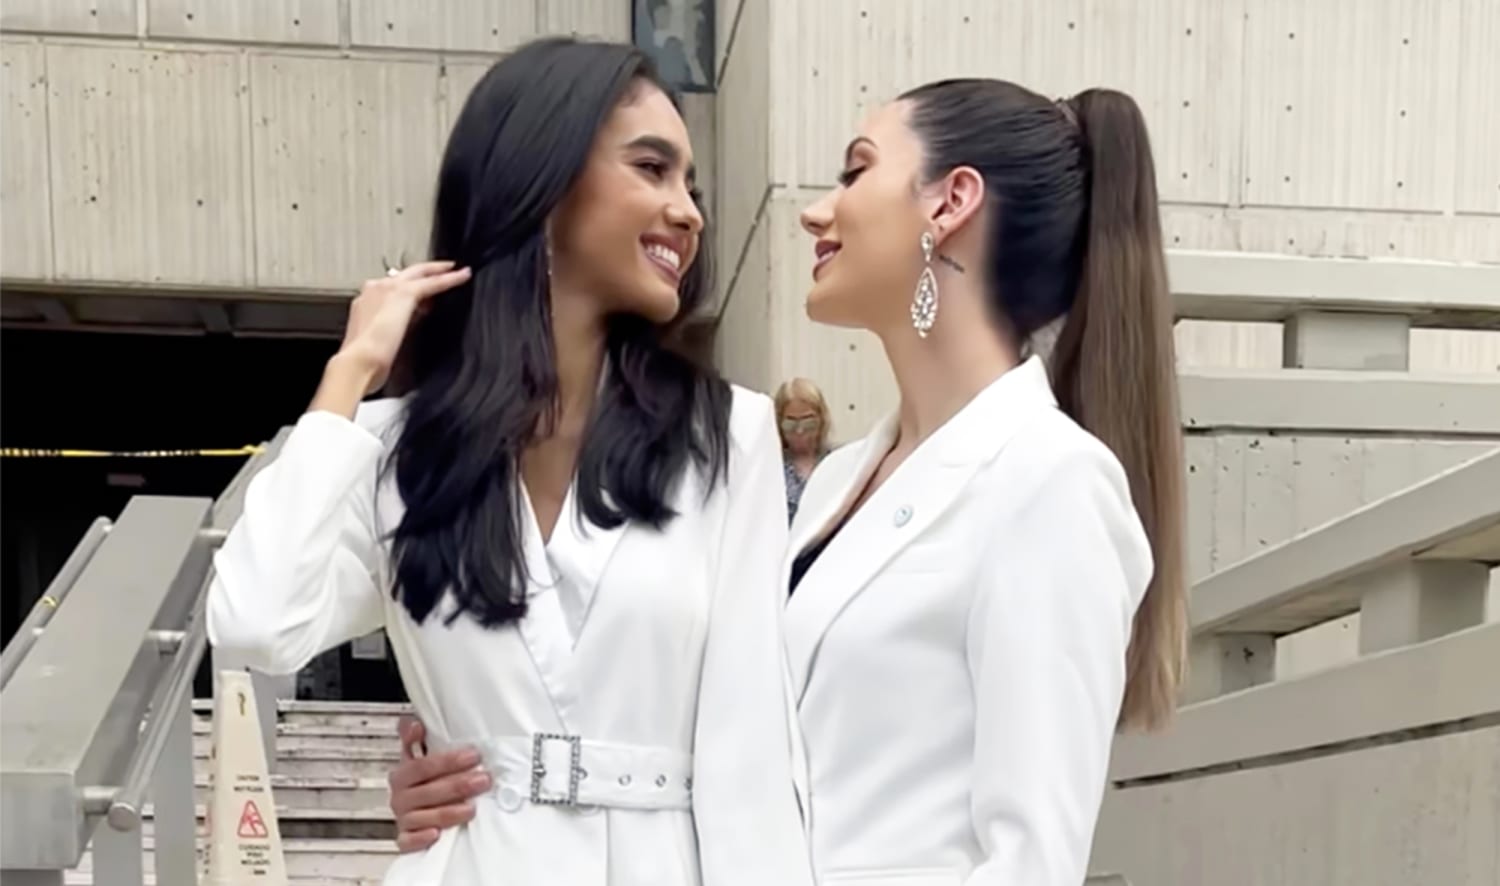 Miss Argentina and Miss Puerto Rico reveal they secretly got married